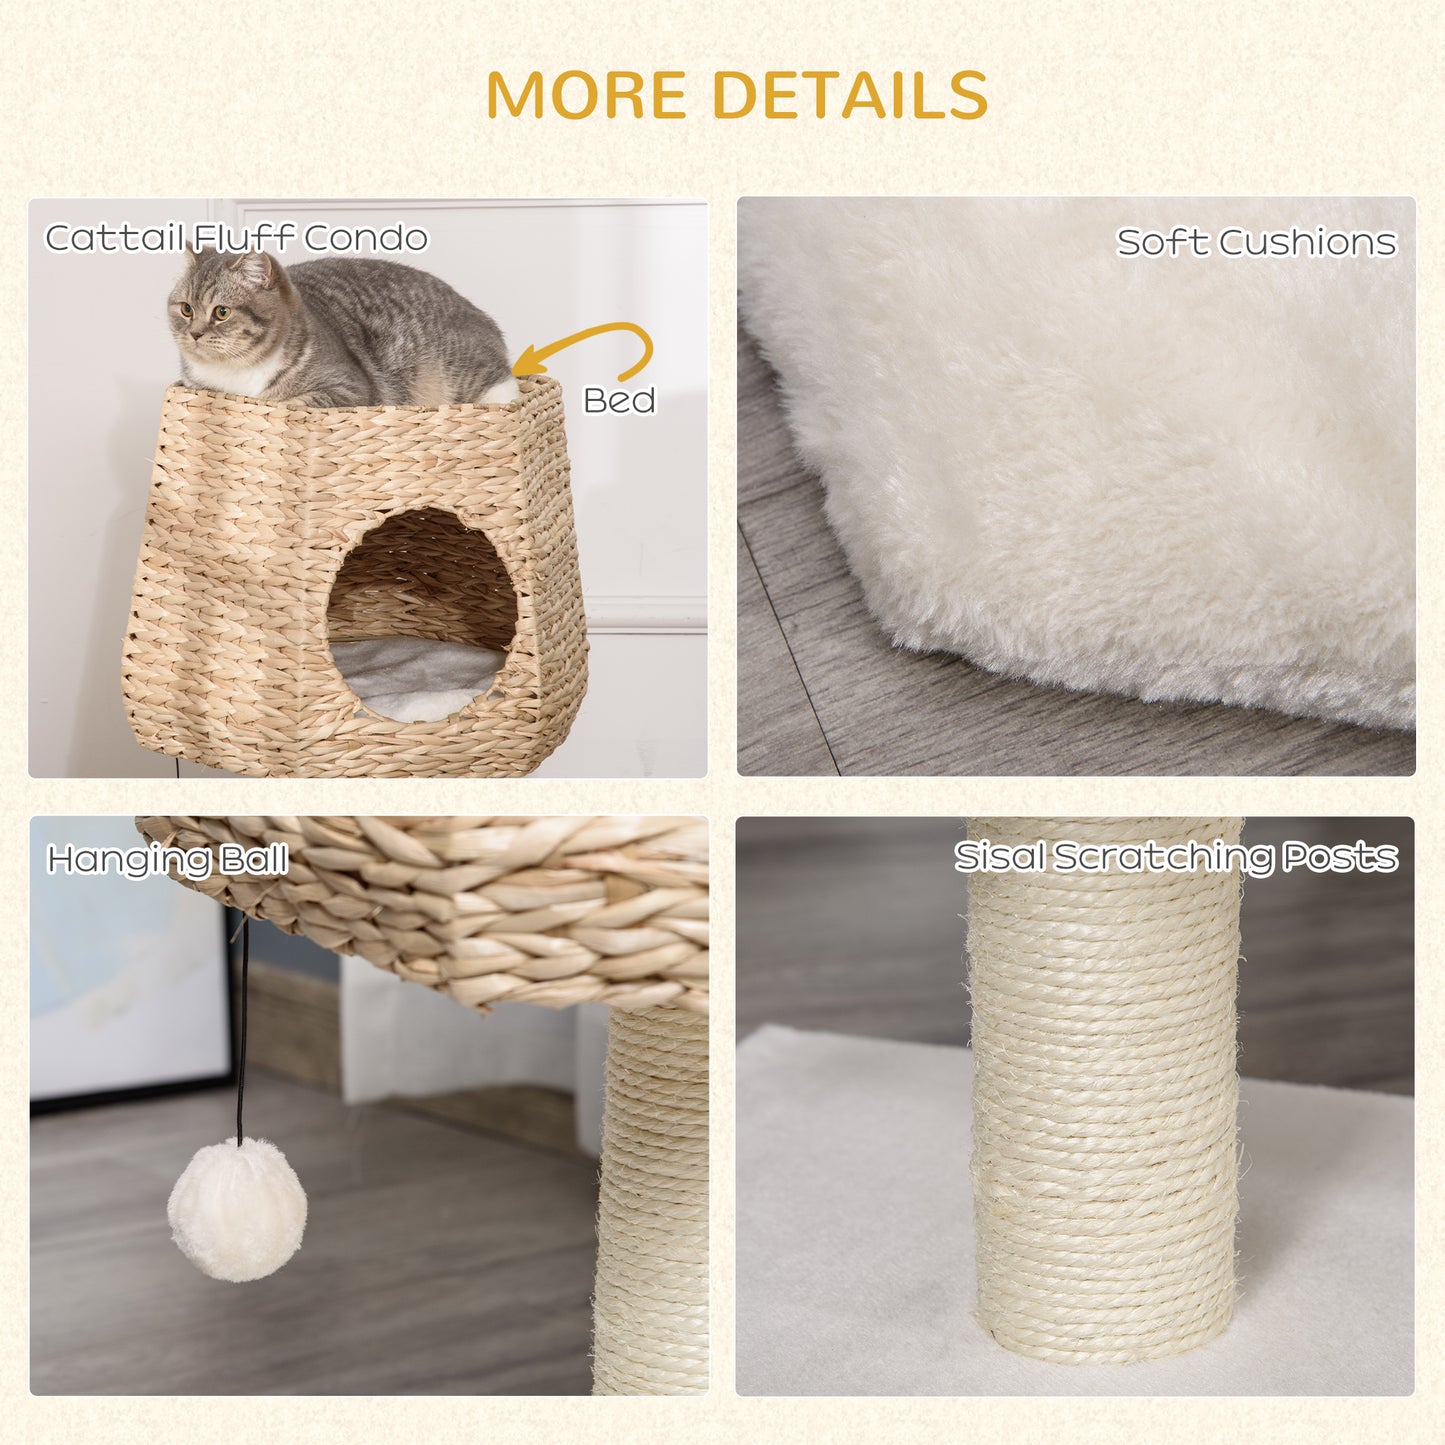 PawHut Cat Tree Tower Climbing Activity Center Kitten Furniture with Cattail Fluff Bed Condo Sisal Scratching Post Hanging Ball 45 x 45 x 66cm Natural